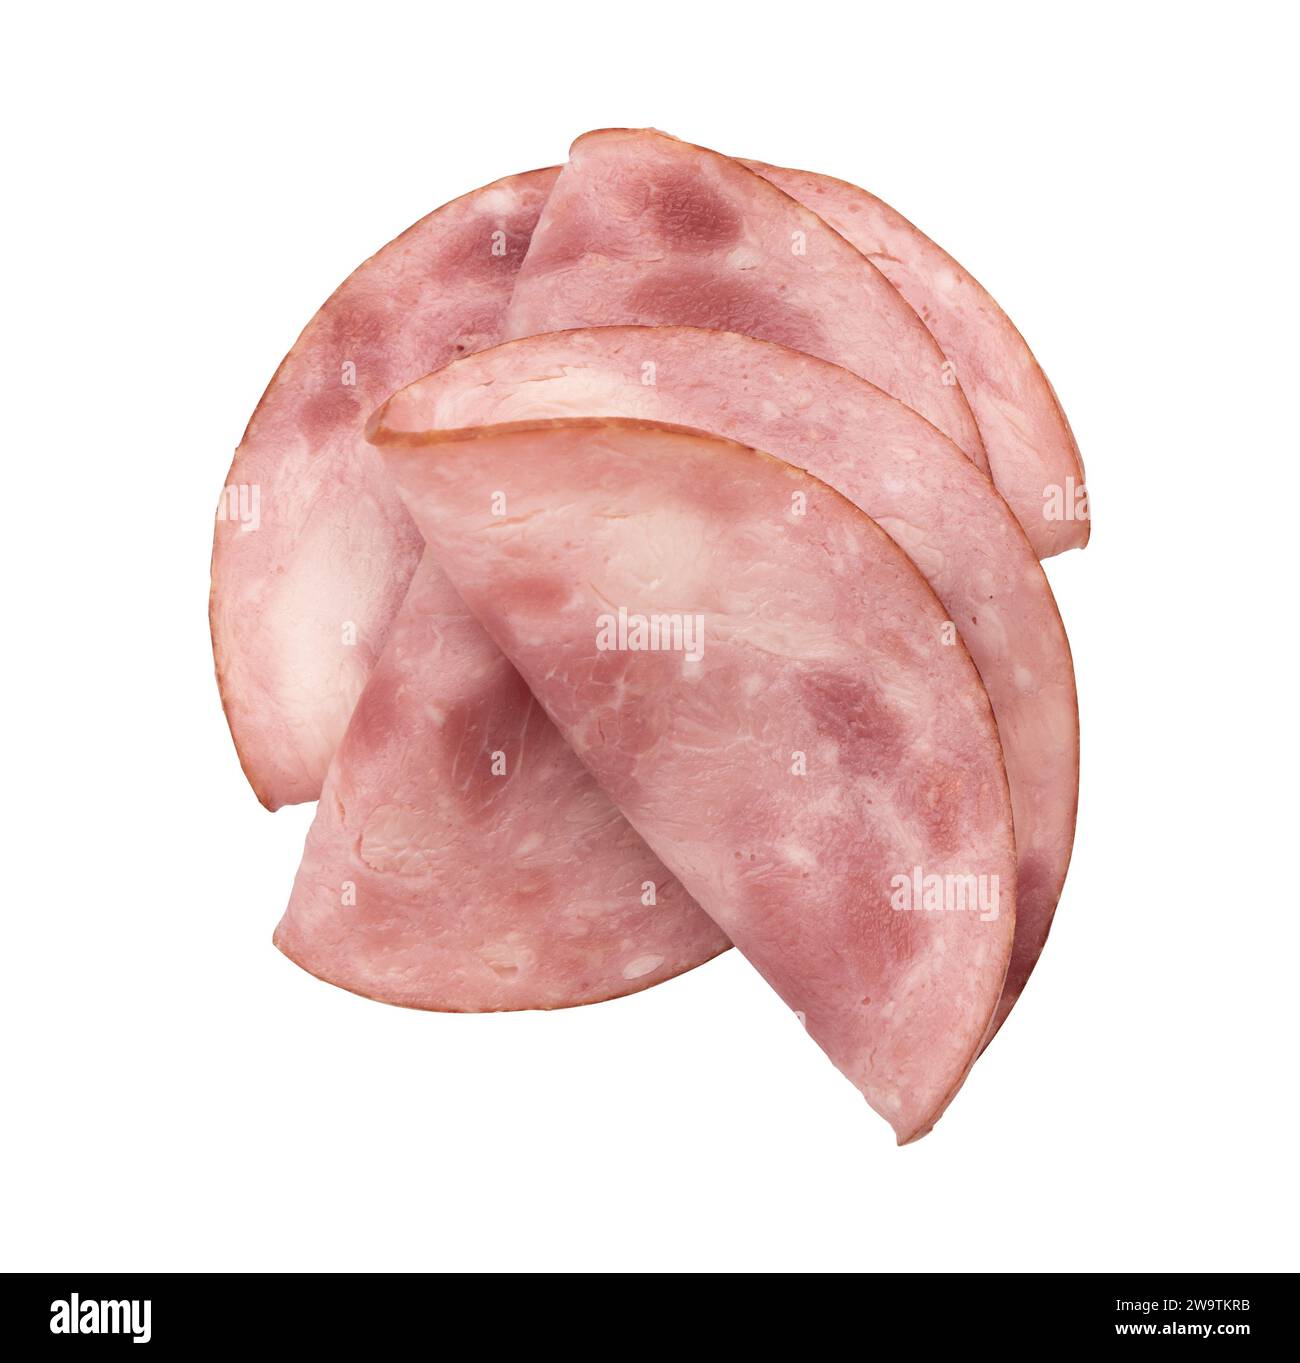 round pieces of ham isolated on white background with clipping path, pieces of pork ham cut into slices laid out to create layout, italian food Stock Photo